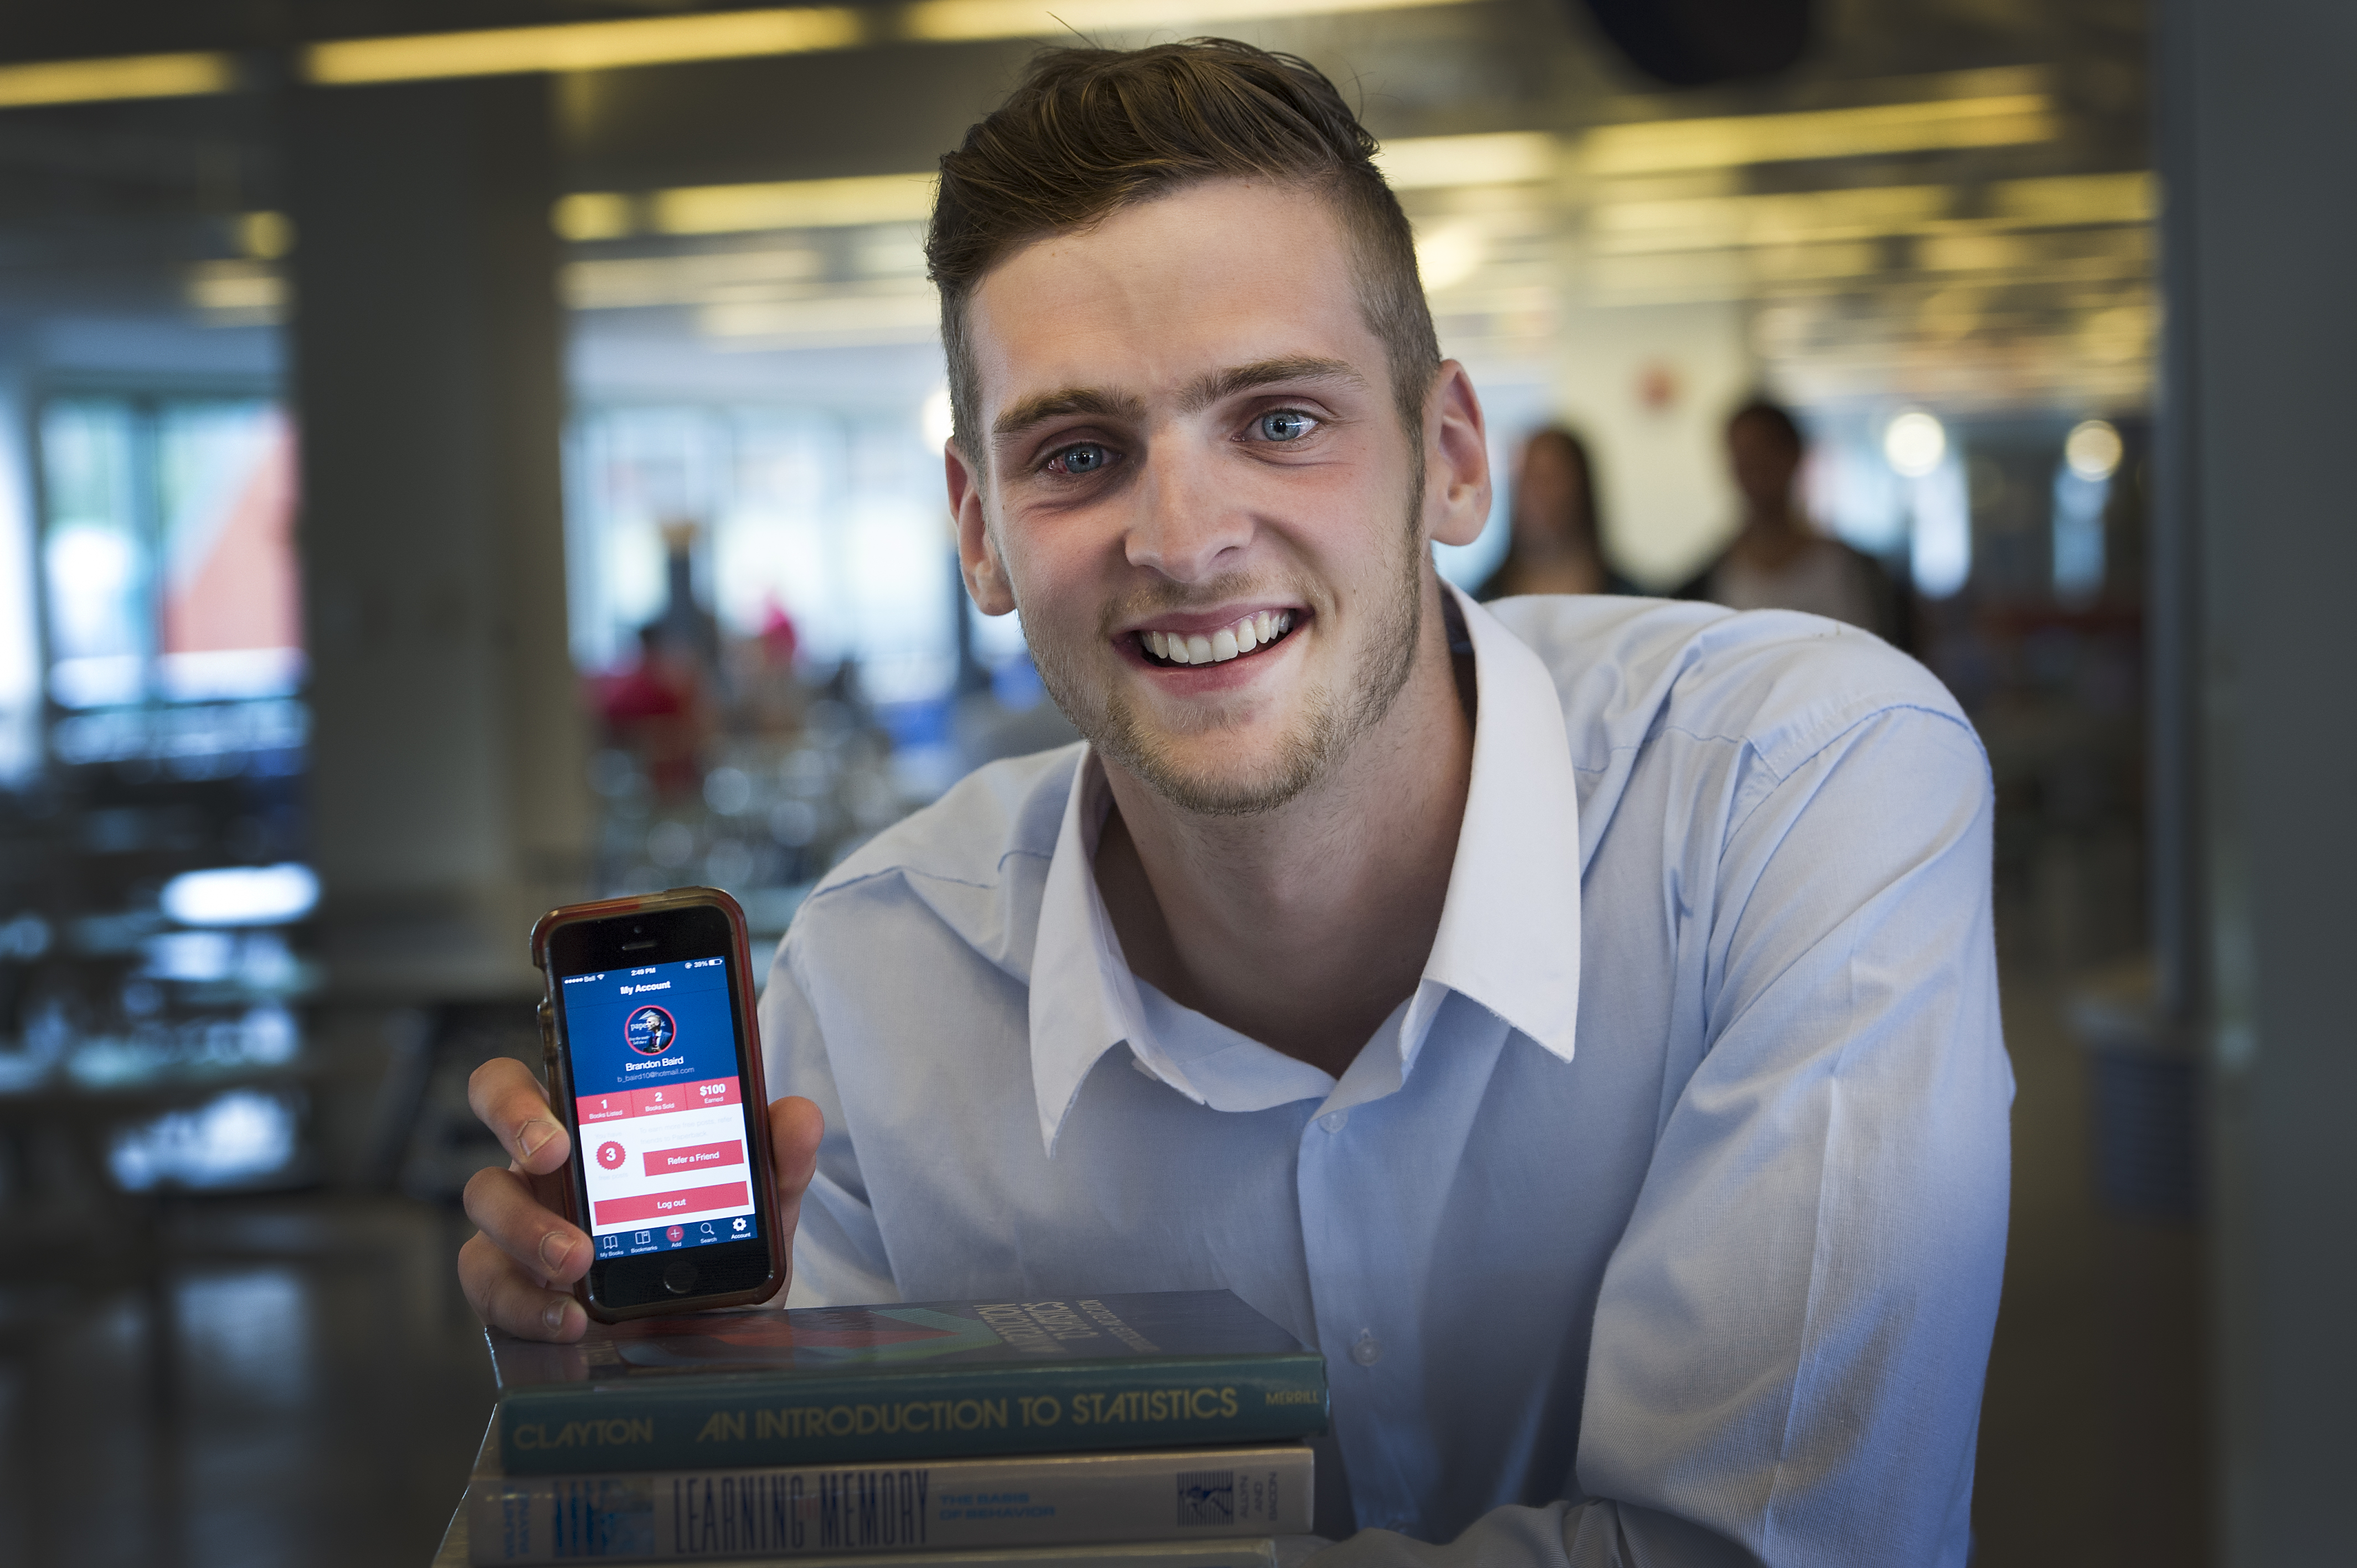 Alumnus Brandon Baird has developed a new app to help students buy and sell used textbooks.